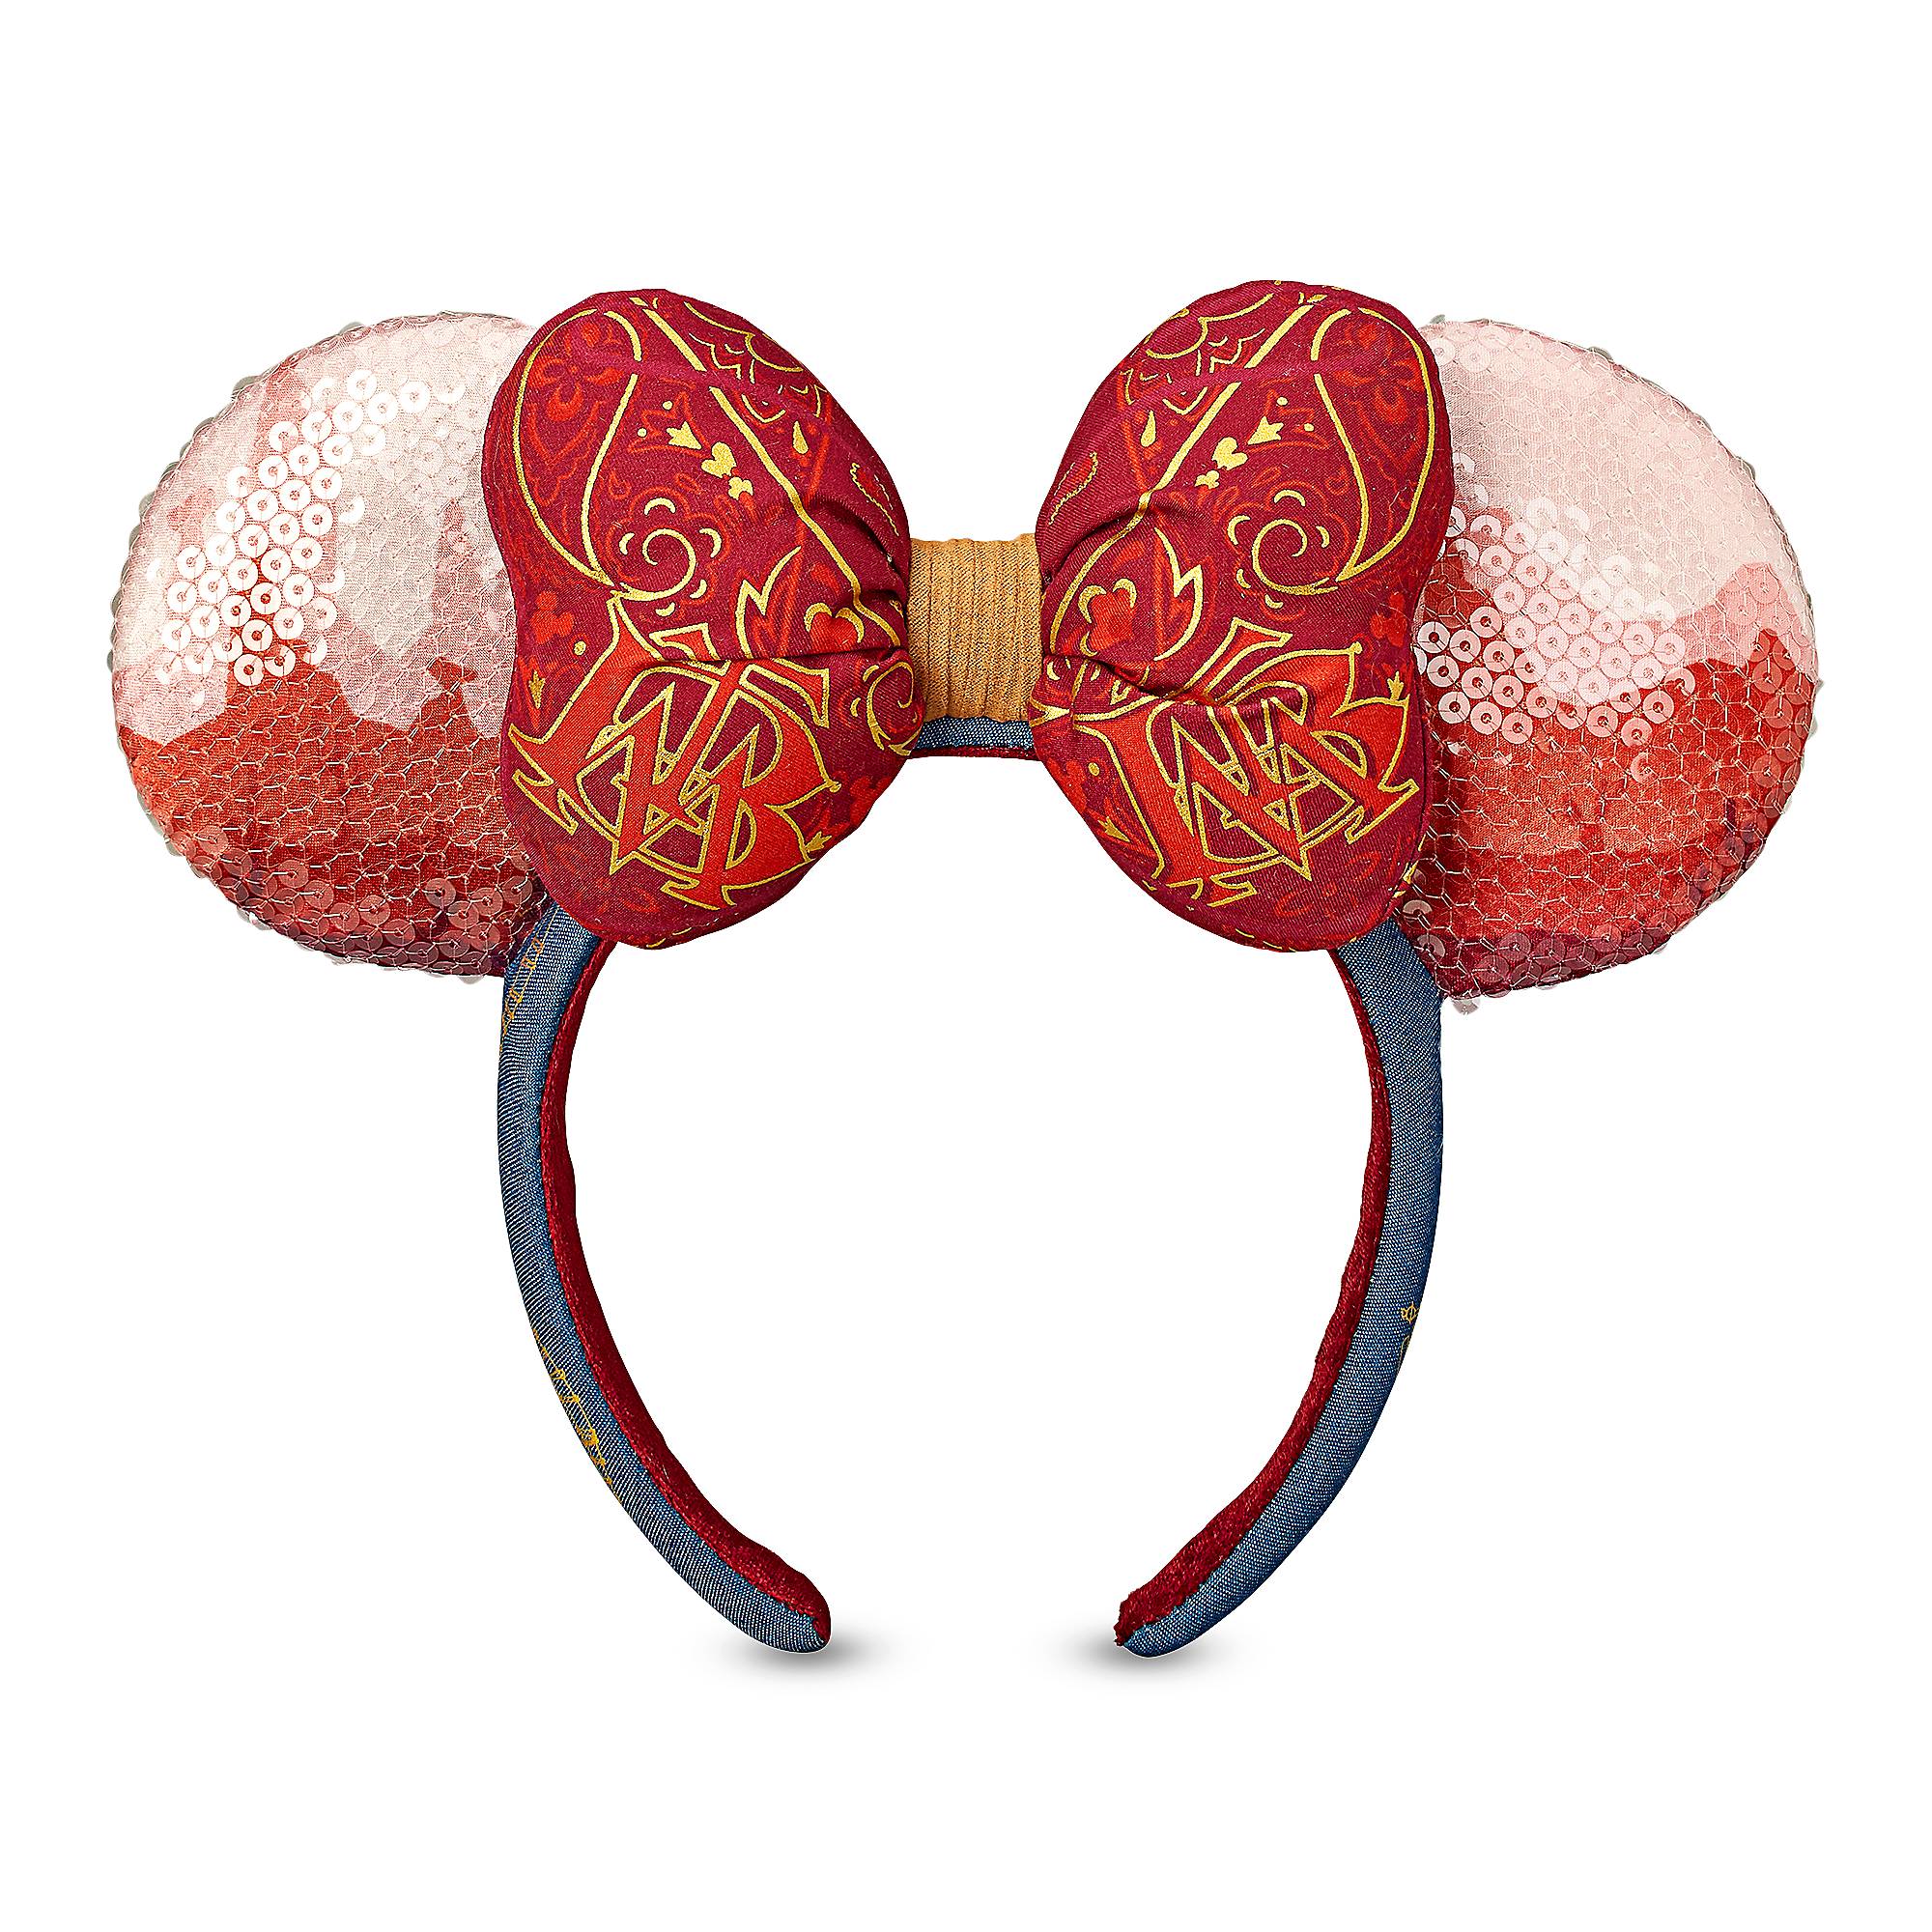 Minnie Mouse - The Main Attraction Ear Headband for Adults – Big Thunder Mountain Railroad – Limited Release image